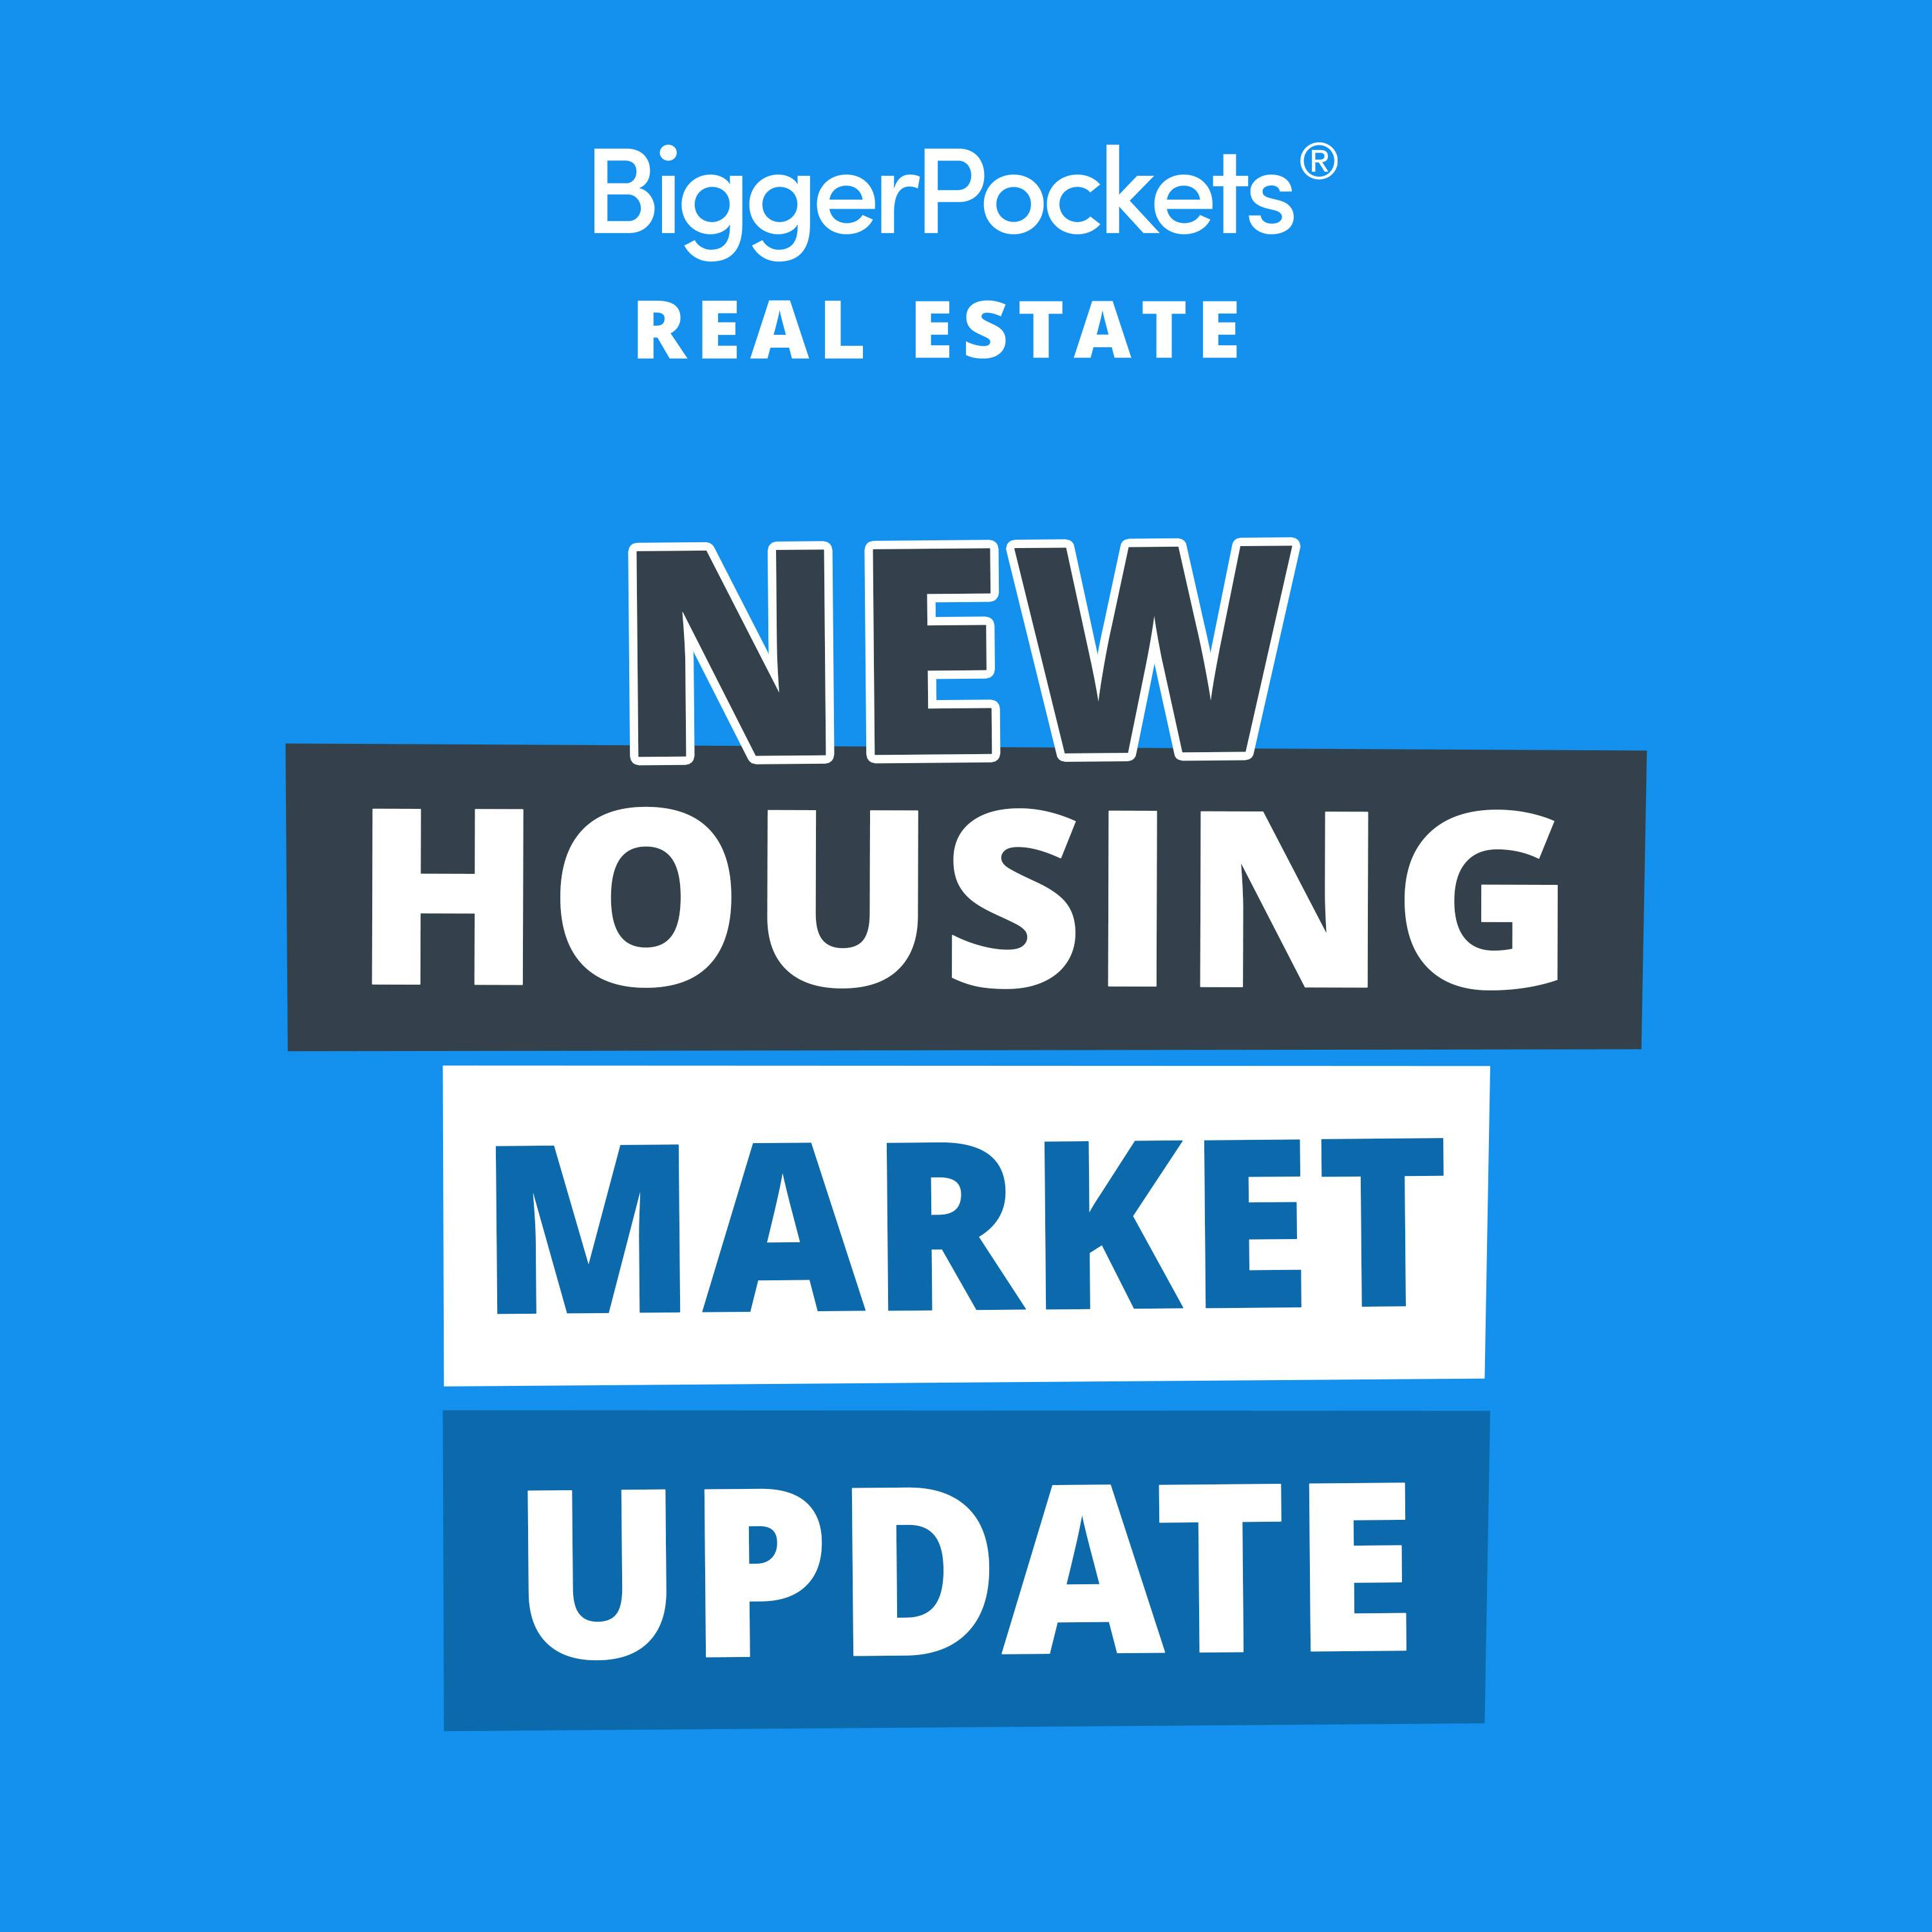 760: BiggerNews: Buyers Jump Back In as Real Estate Competition Heats Up